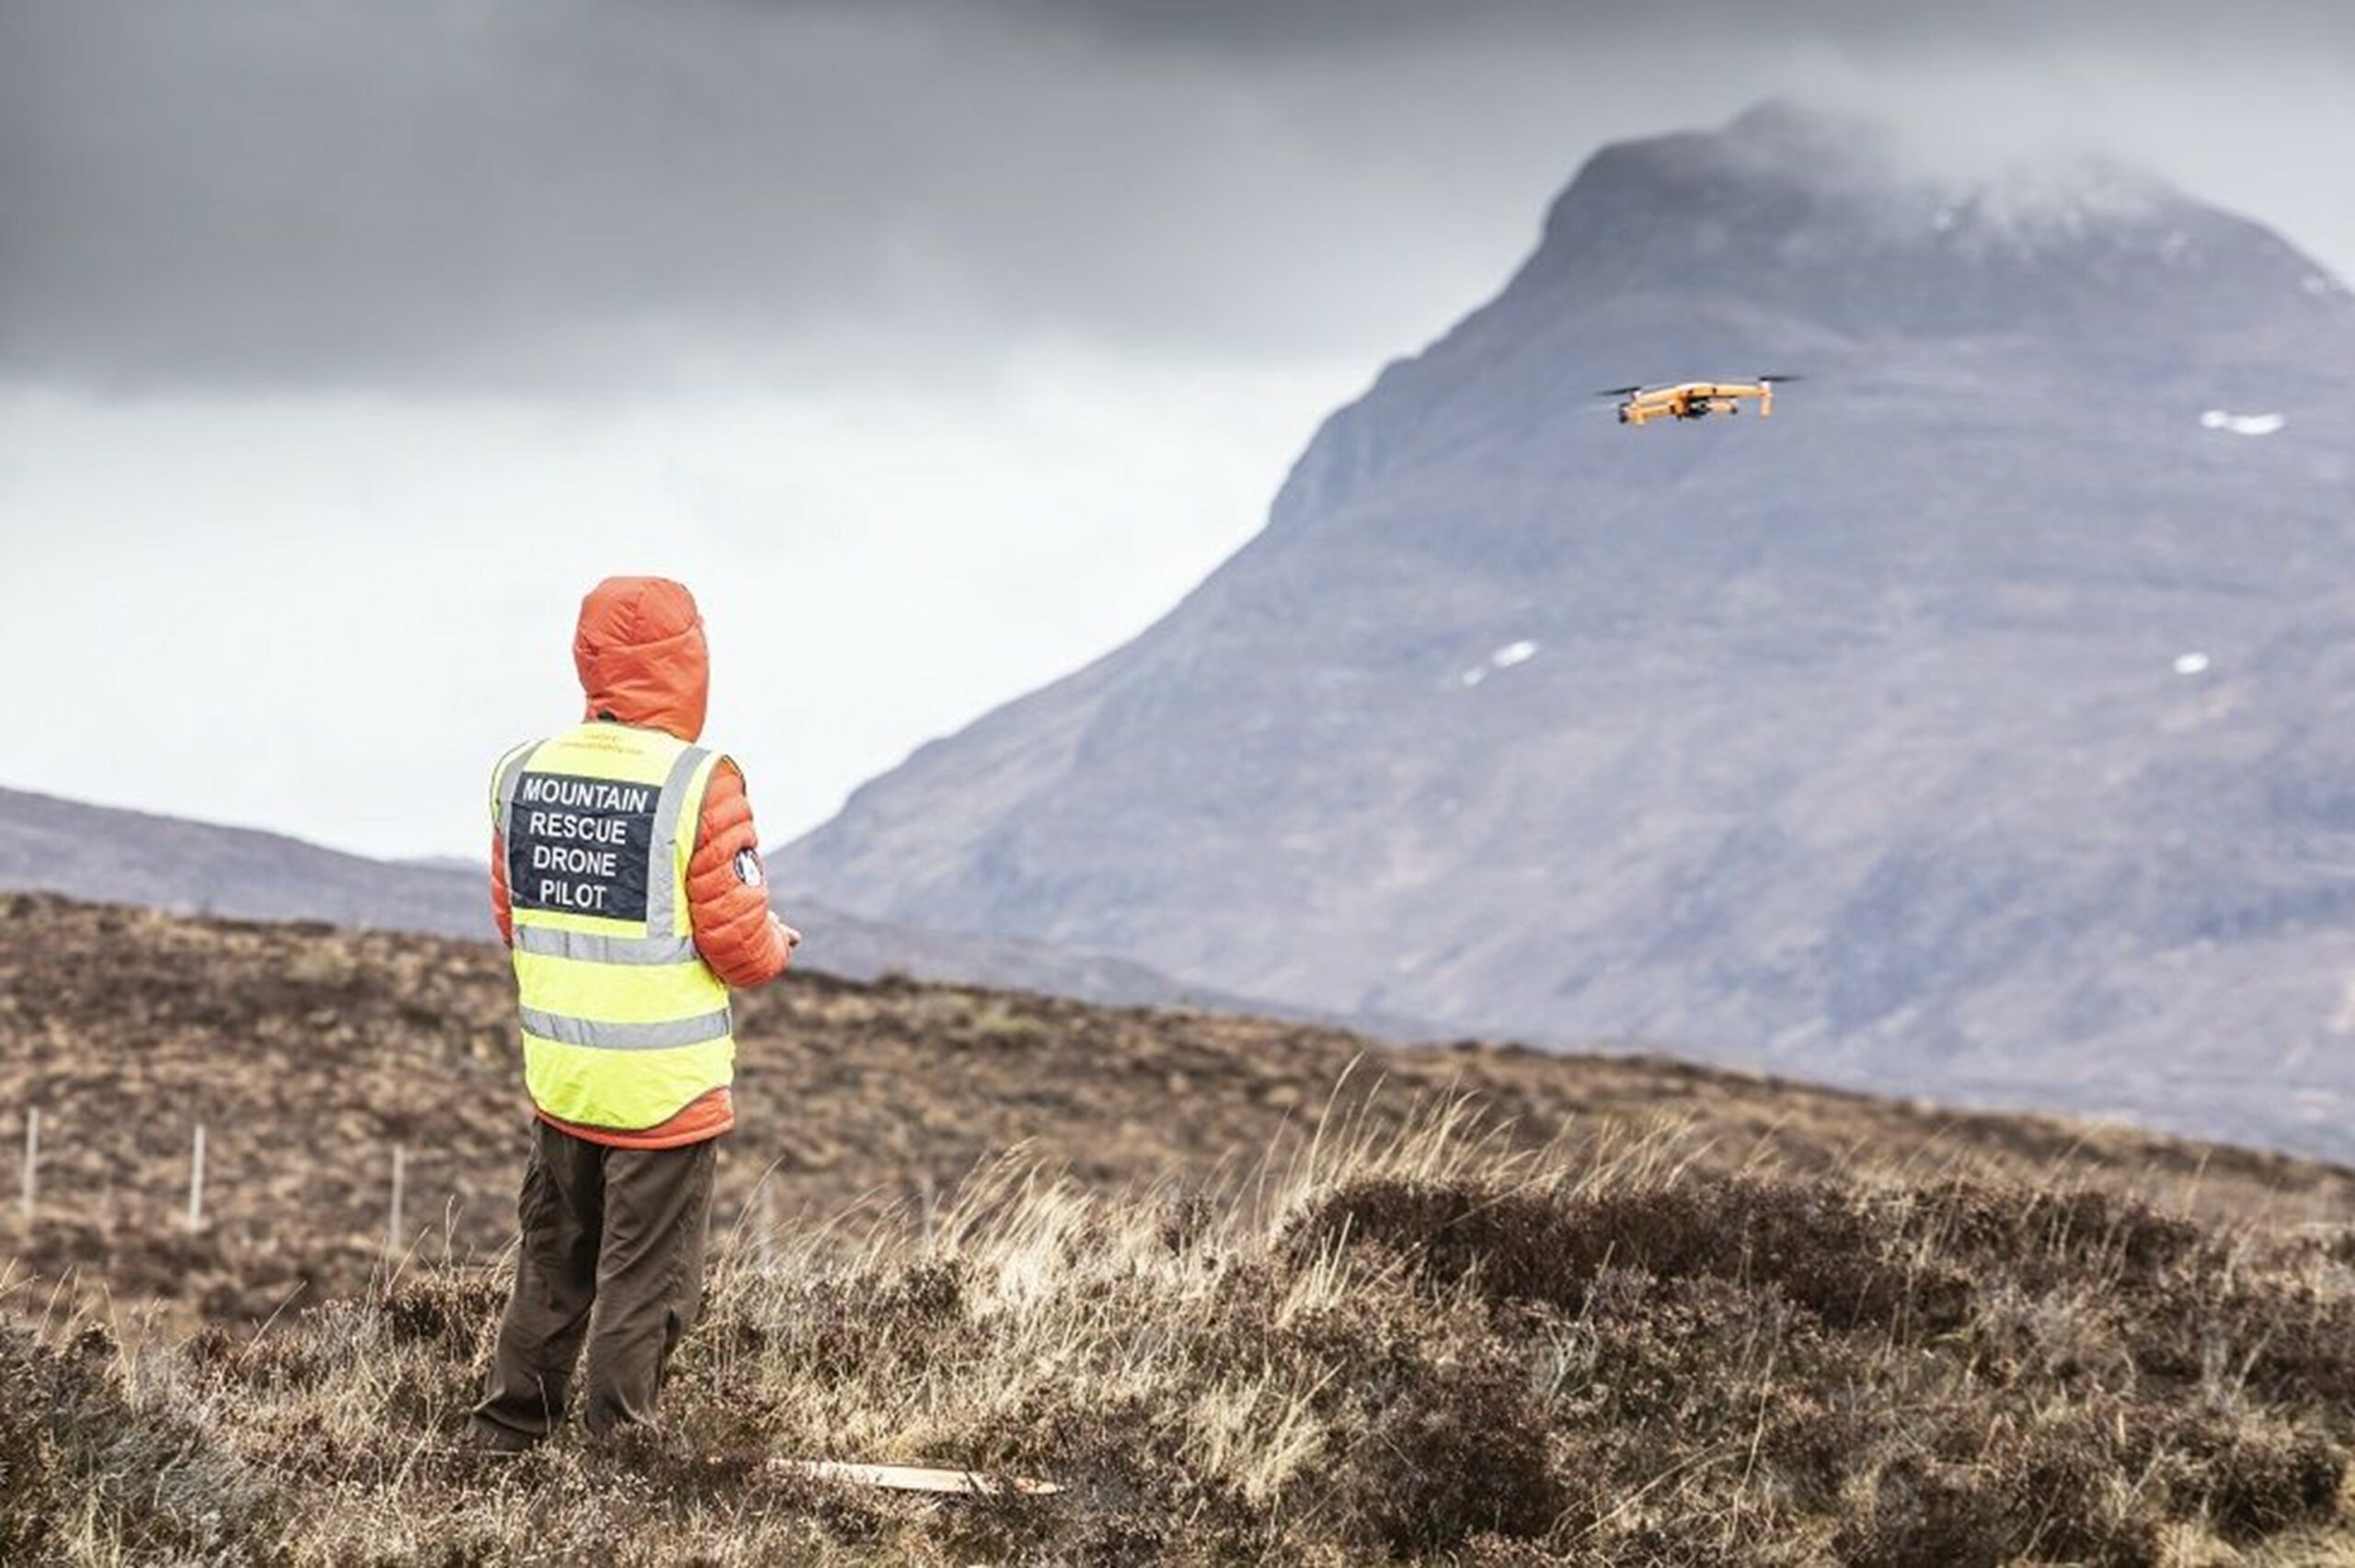 DRONES – A ‘GAME CHANGER’ FOR SCOTTISH MOUNTAIN RESCUE TEAMS